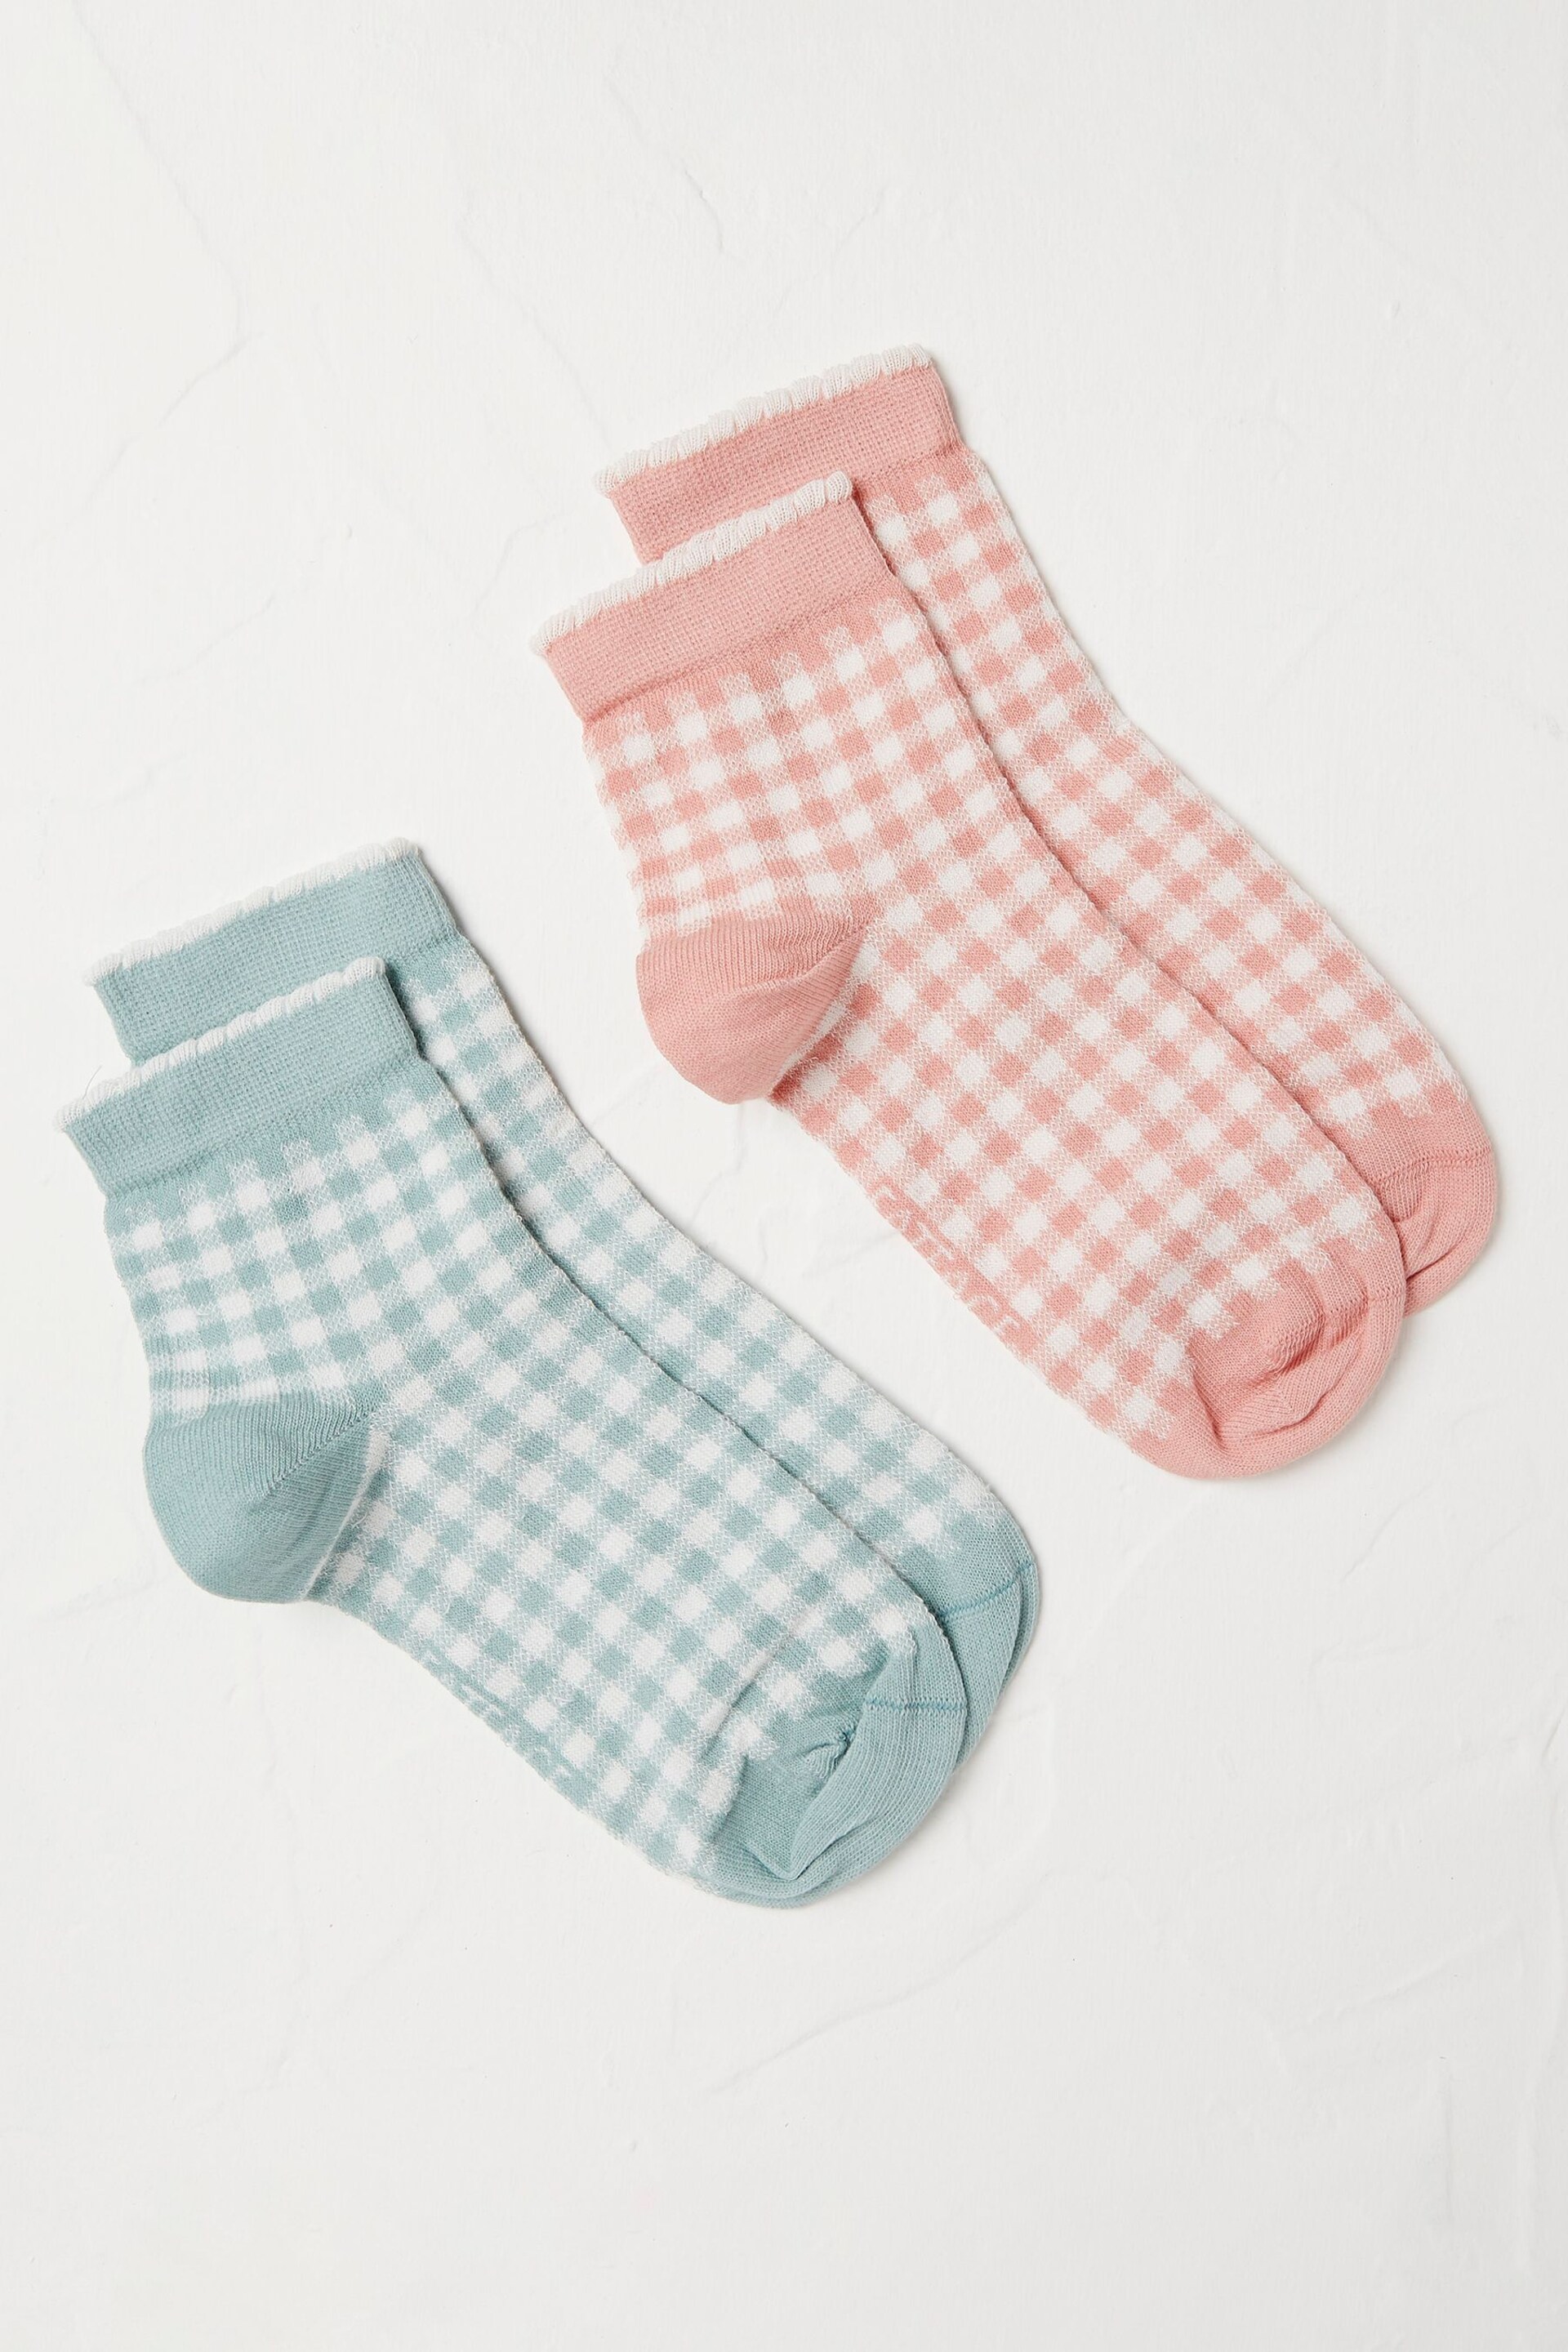 FatFace Green Gingham Socks 2 Pack - Image 1 of 2